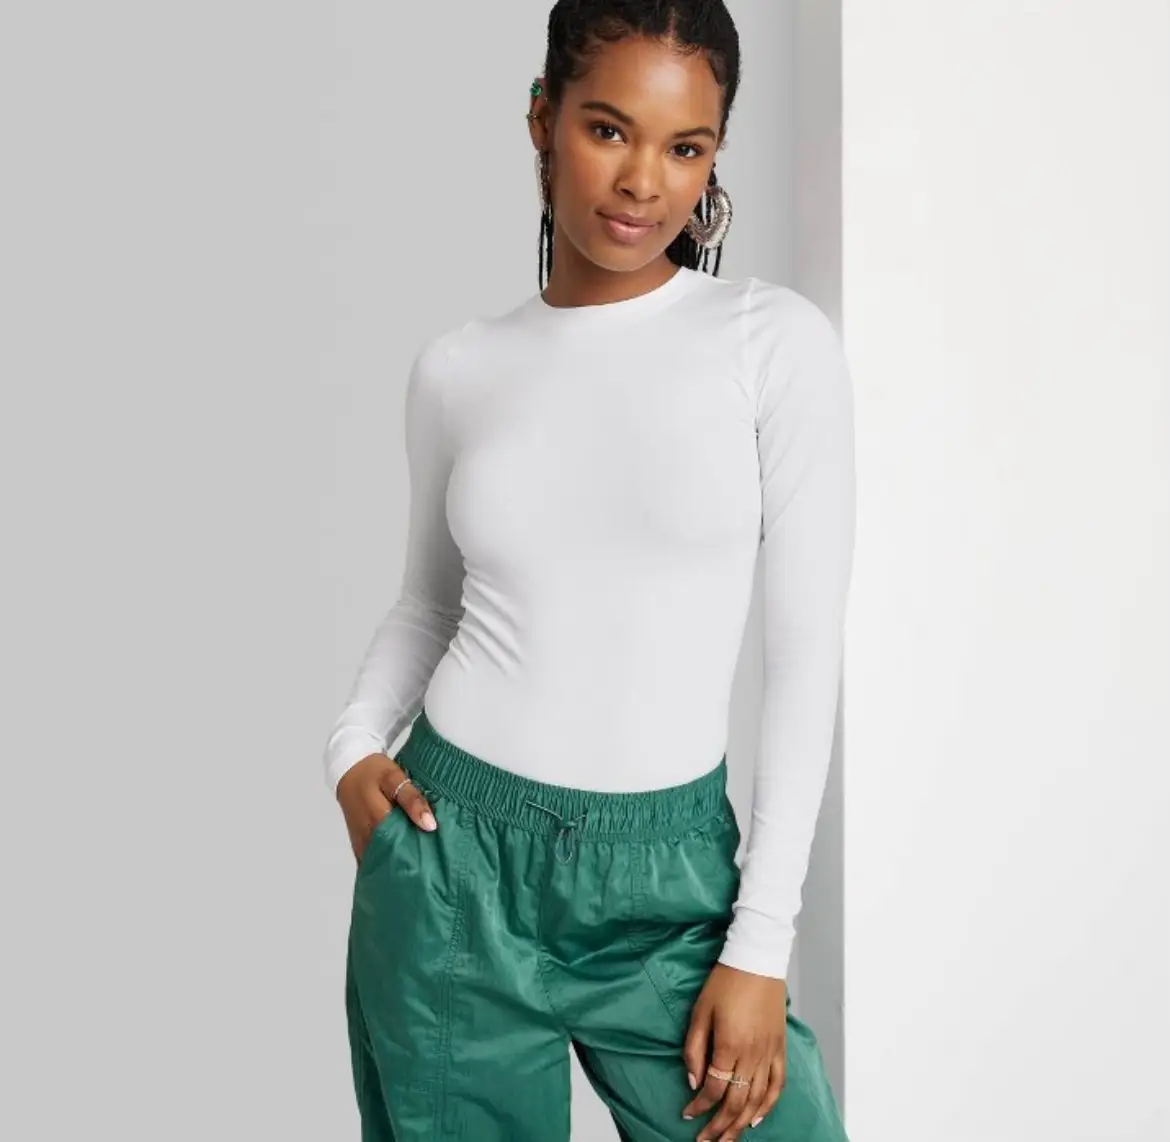 TikToker's Are Calling Target's A New Day Seamless Crop Top a SKIMS Dupe